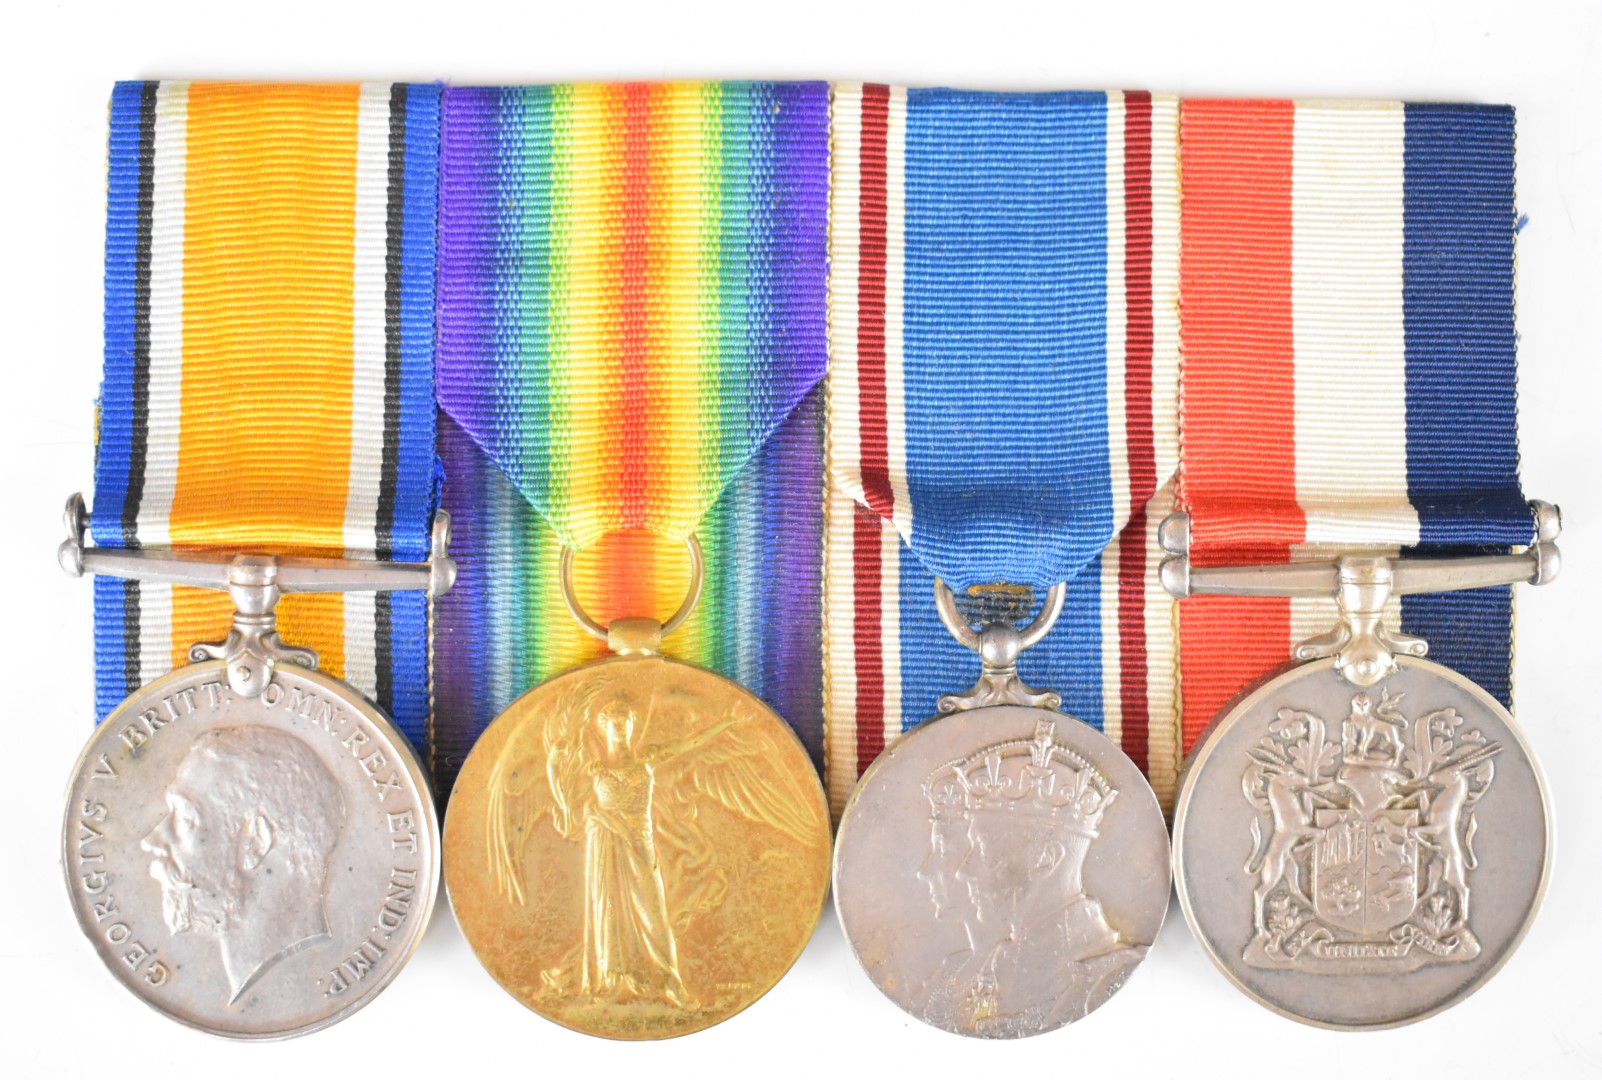 South Africa WW1 medal pair comprising War Medal and Victory Medal named to Cpl J Morgan, 4th